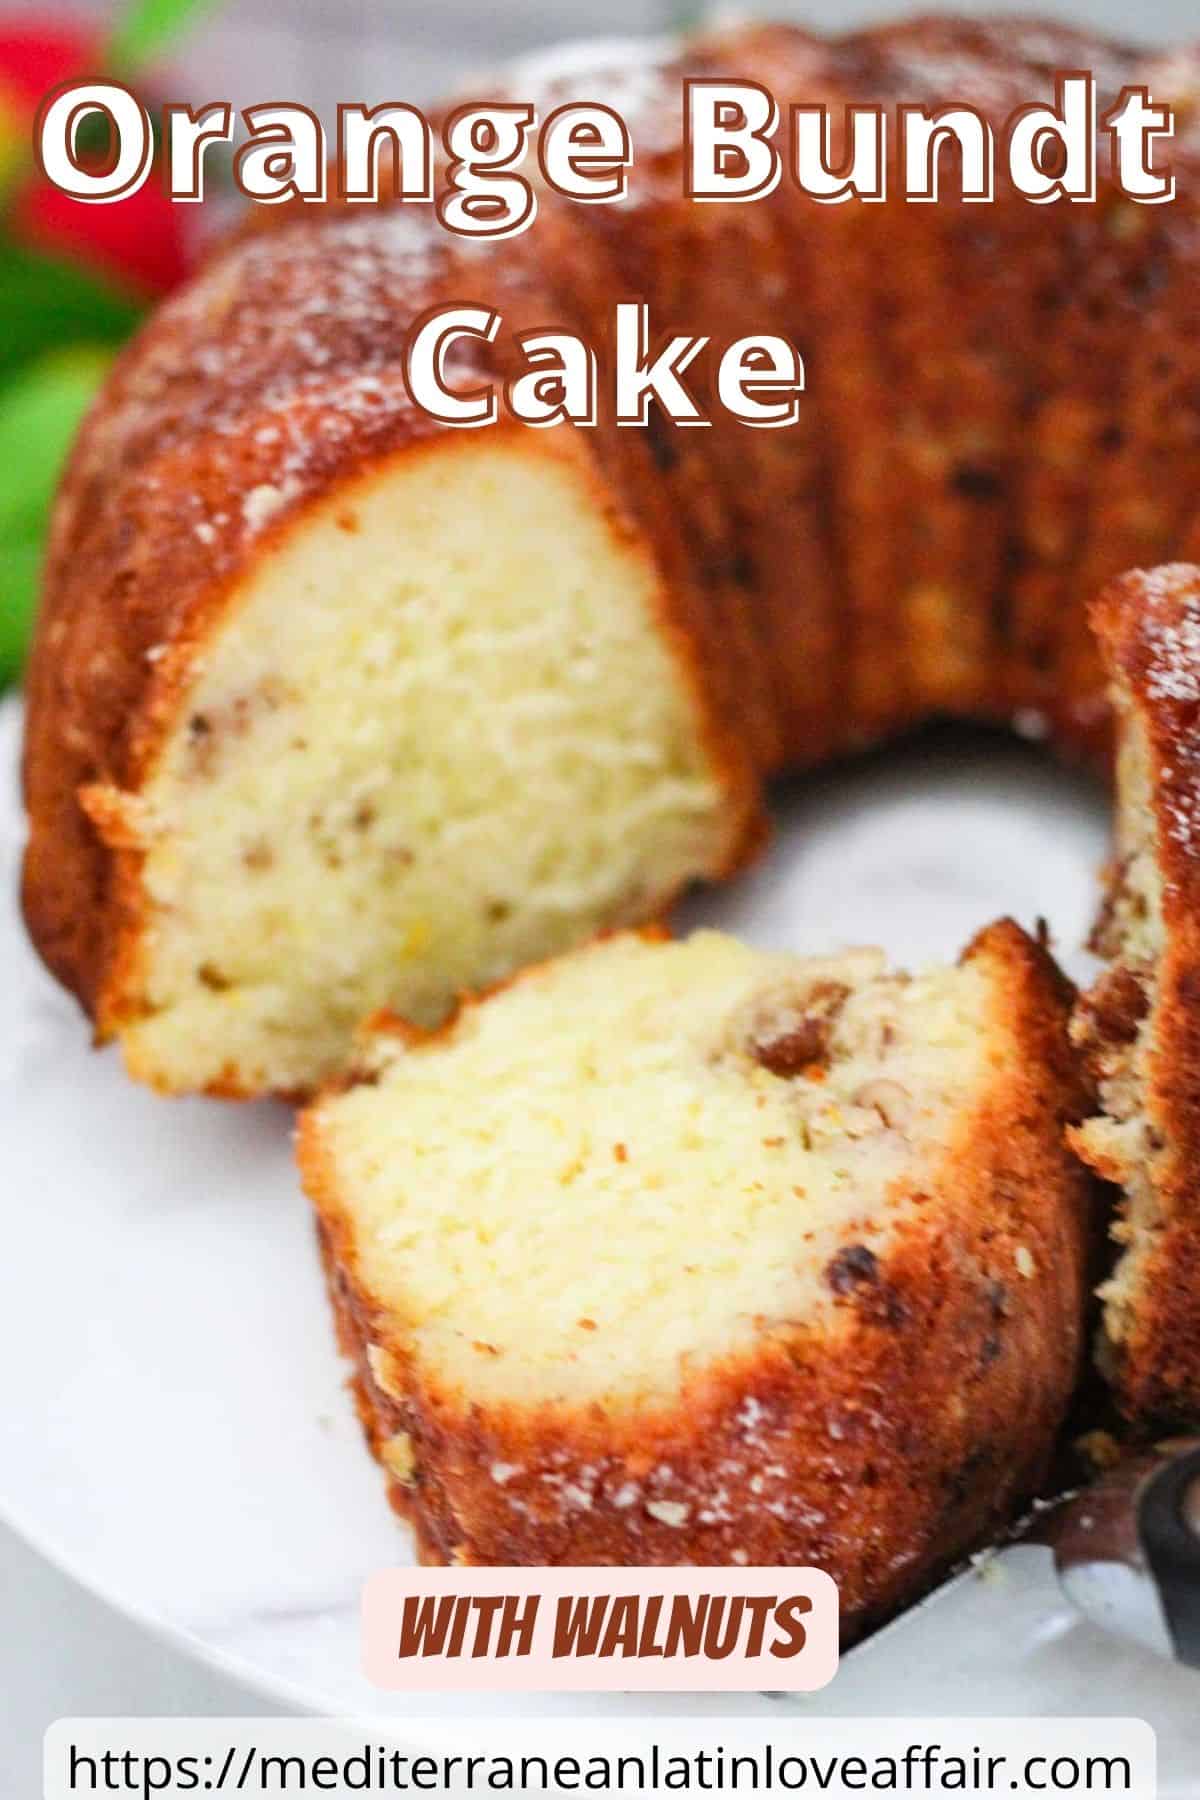 Perfect orange bundt cake with walnuts in the picture shown with a title bar on top and a website link in the bottom.